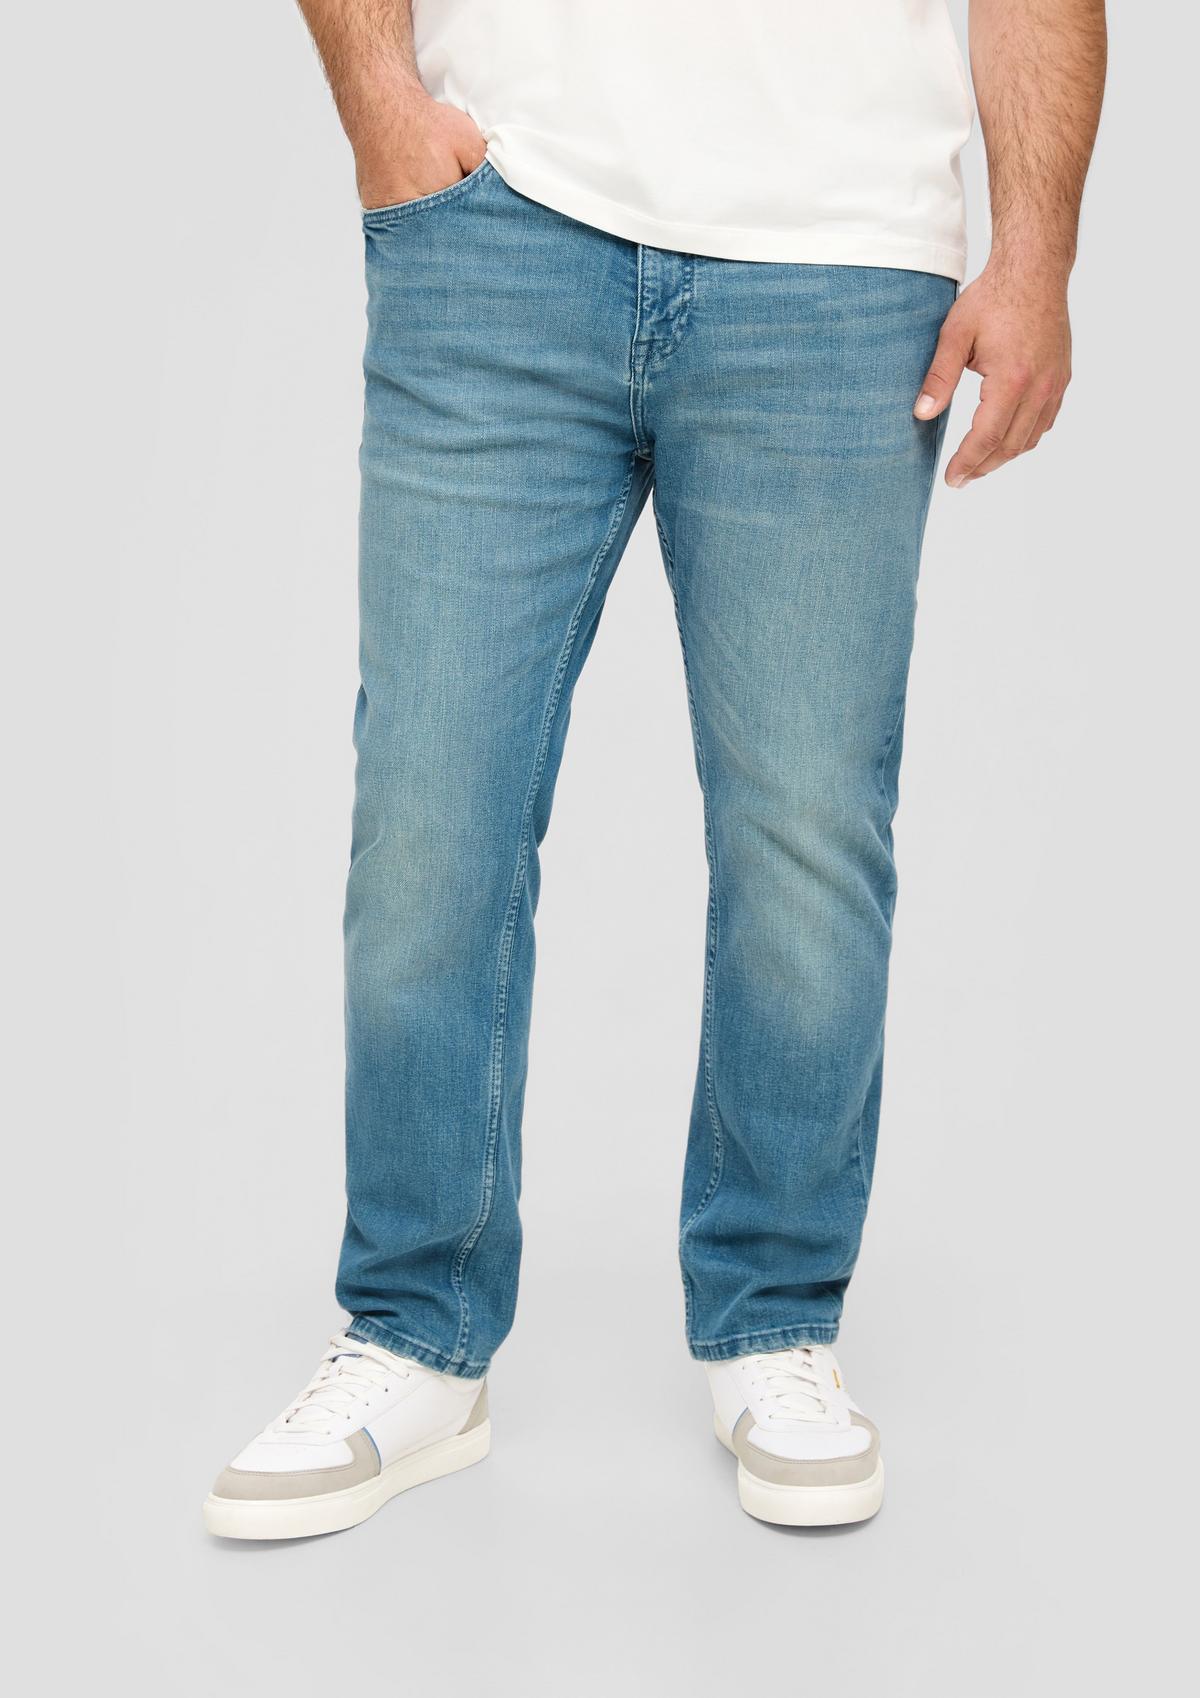 Jeans Casby / relaxed fit / mid rise / straight leg